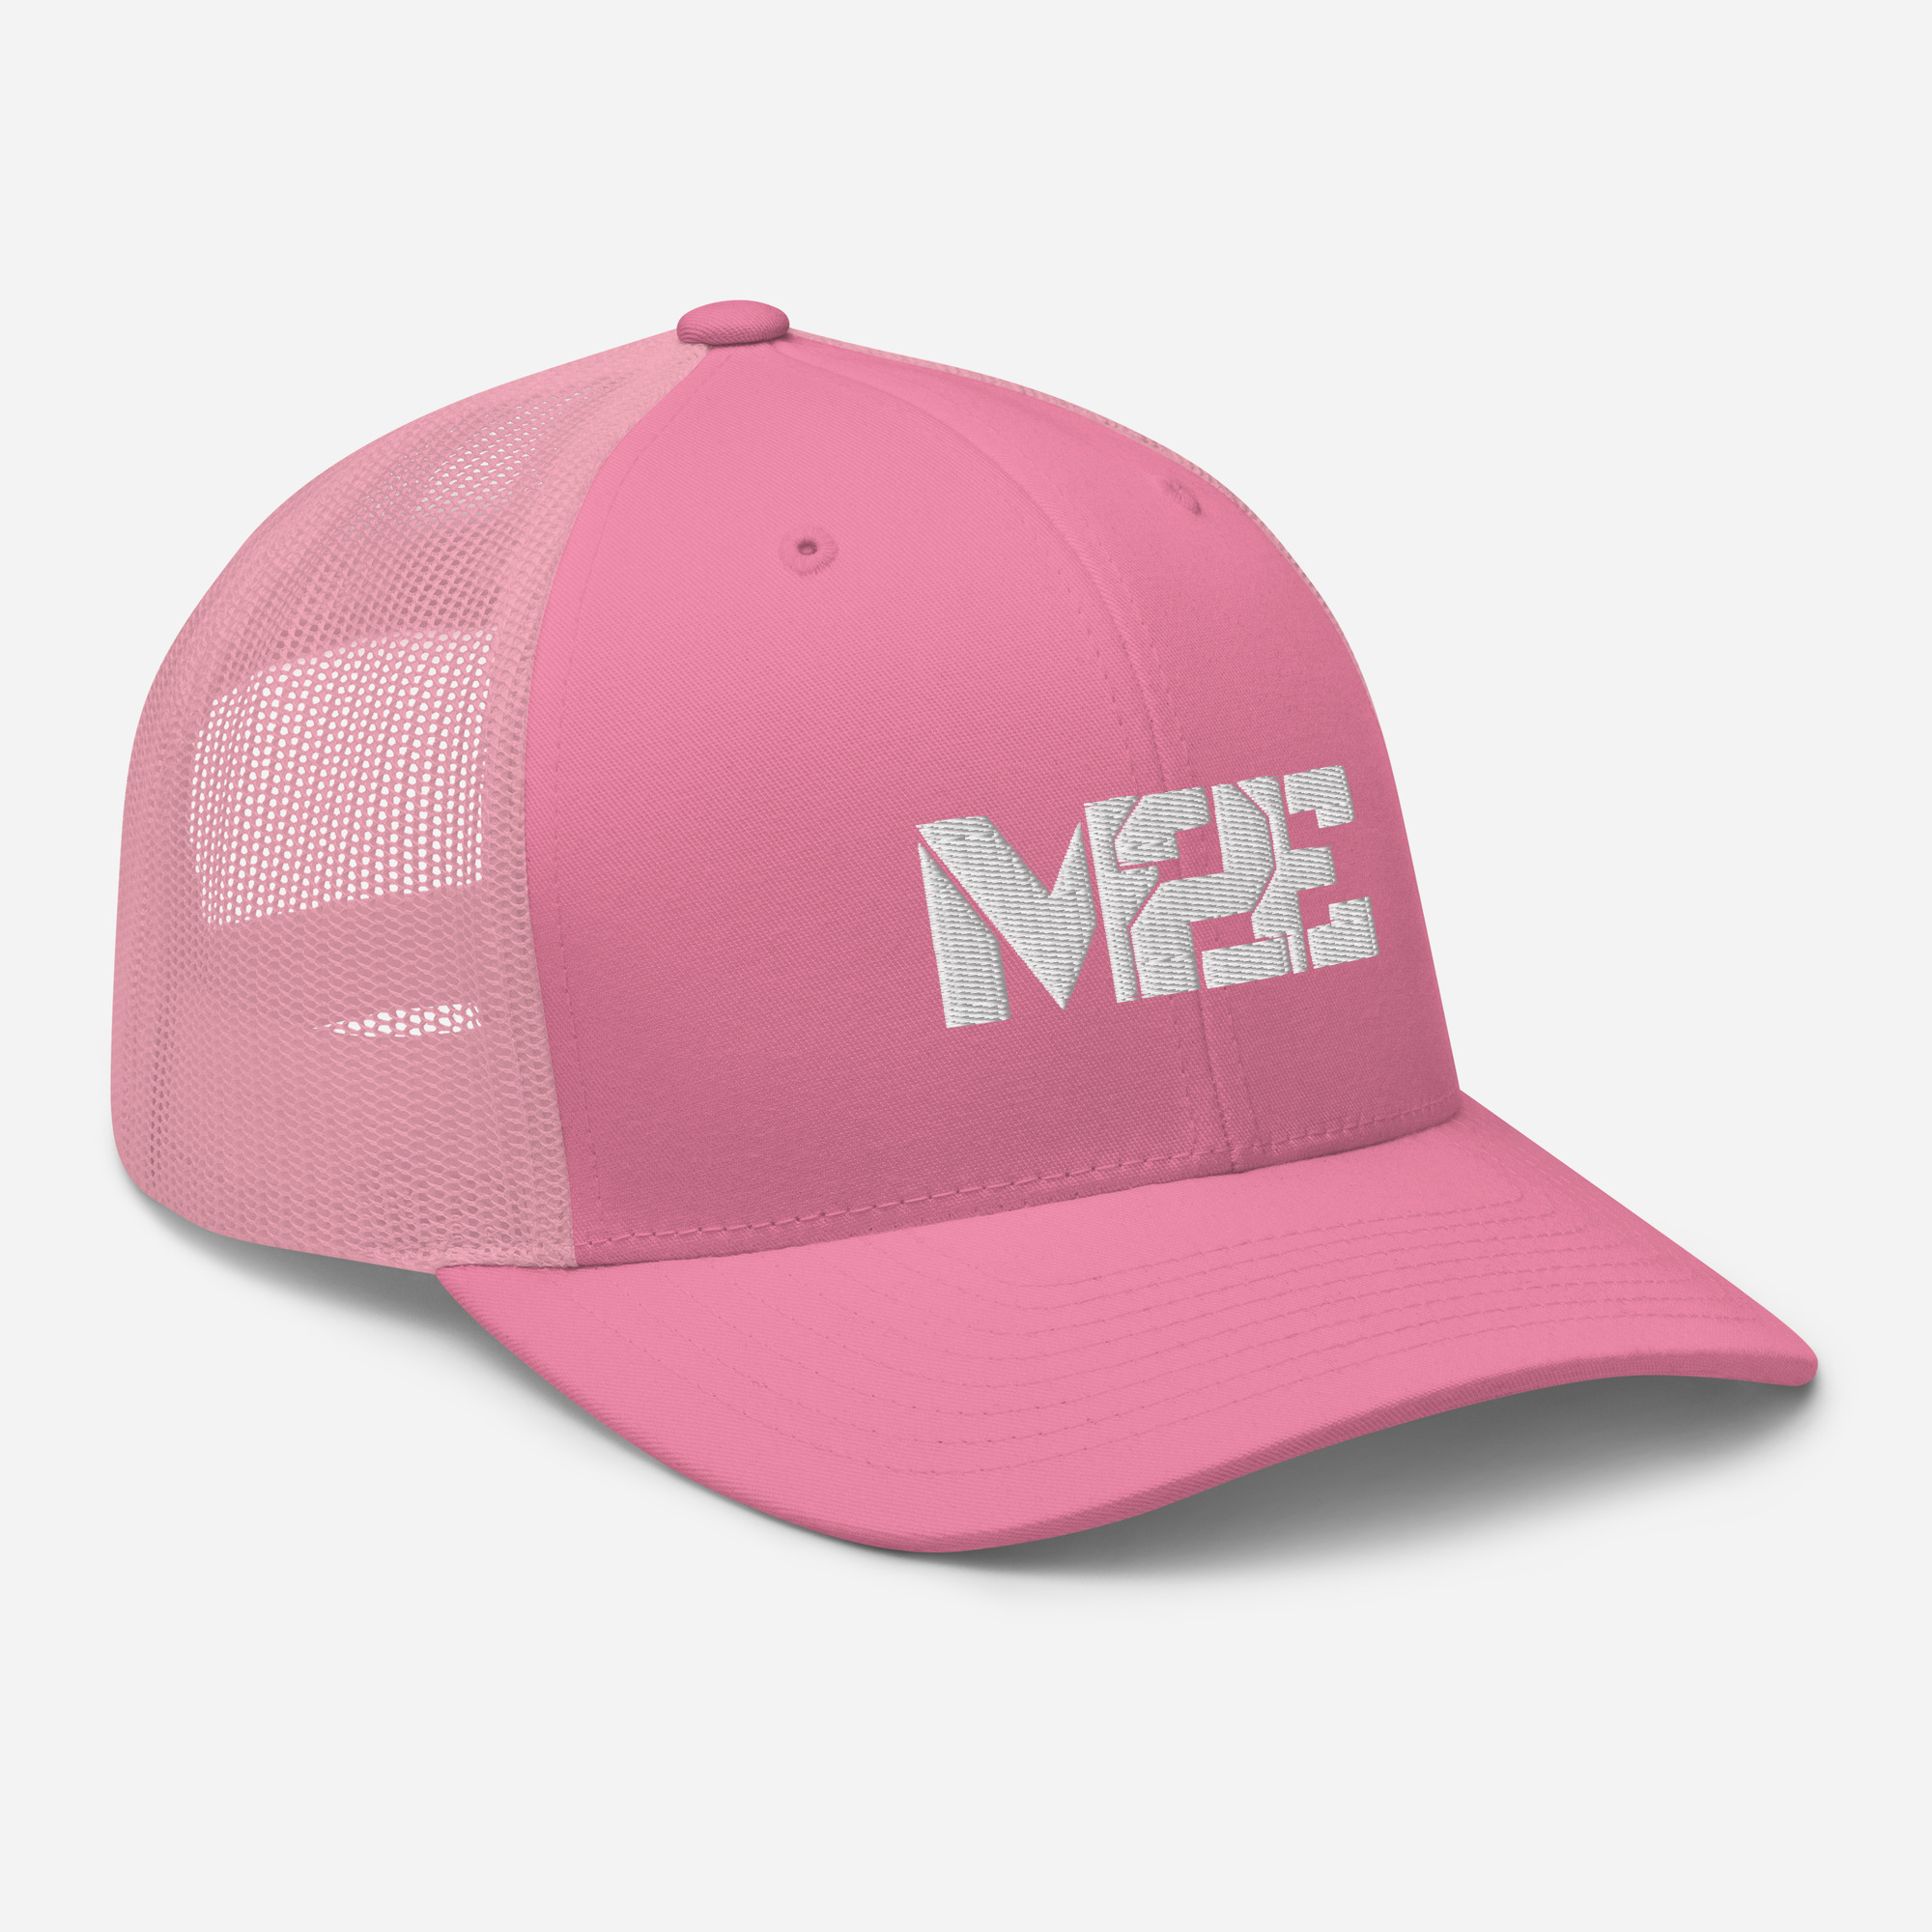 retro-trucker-hat-pink-right-front-6316911a28808.jpg